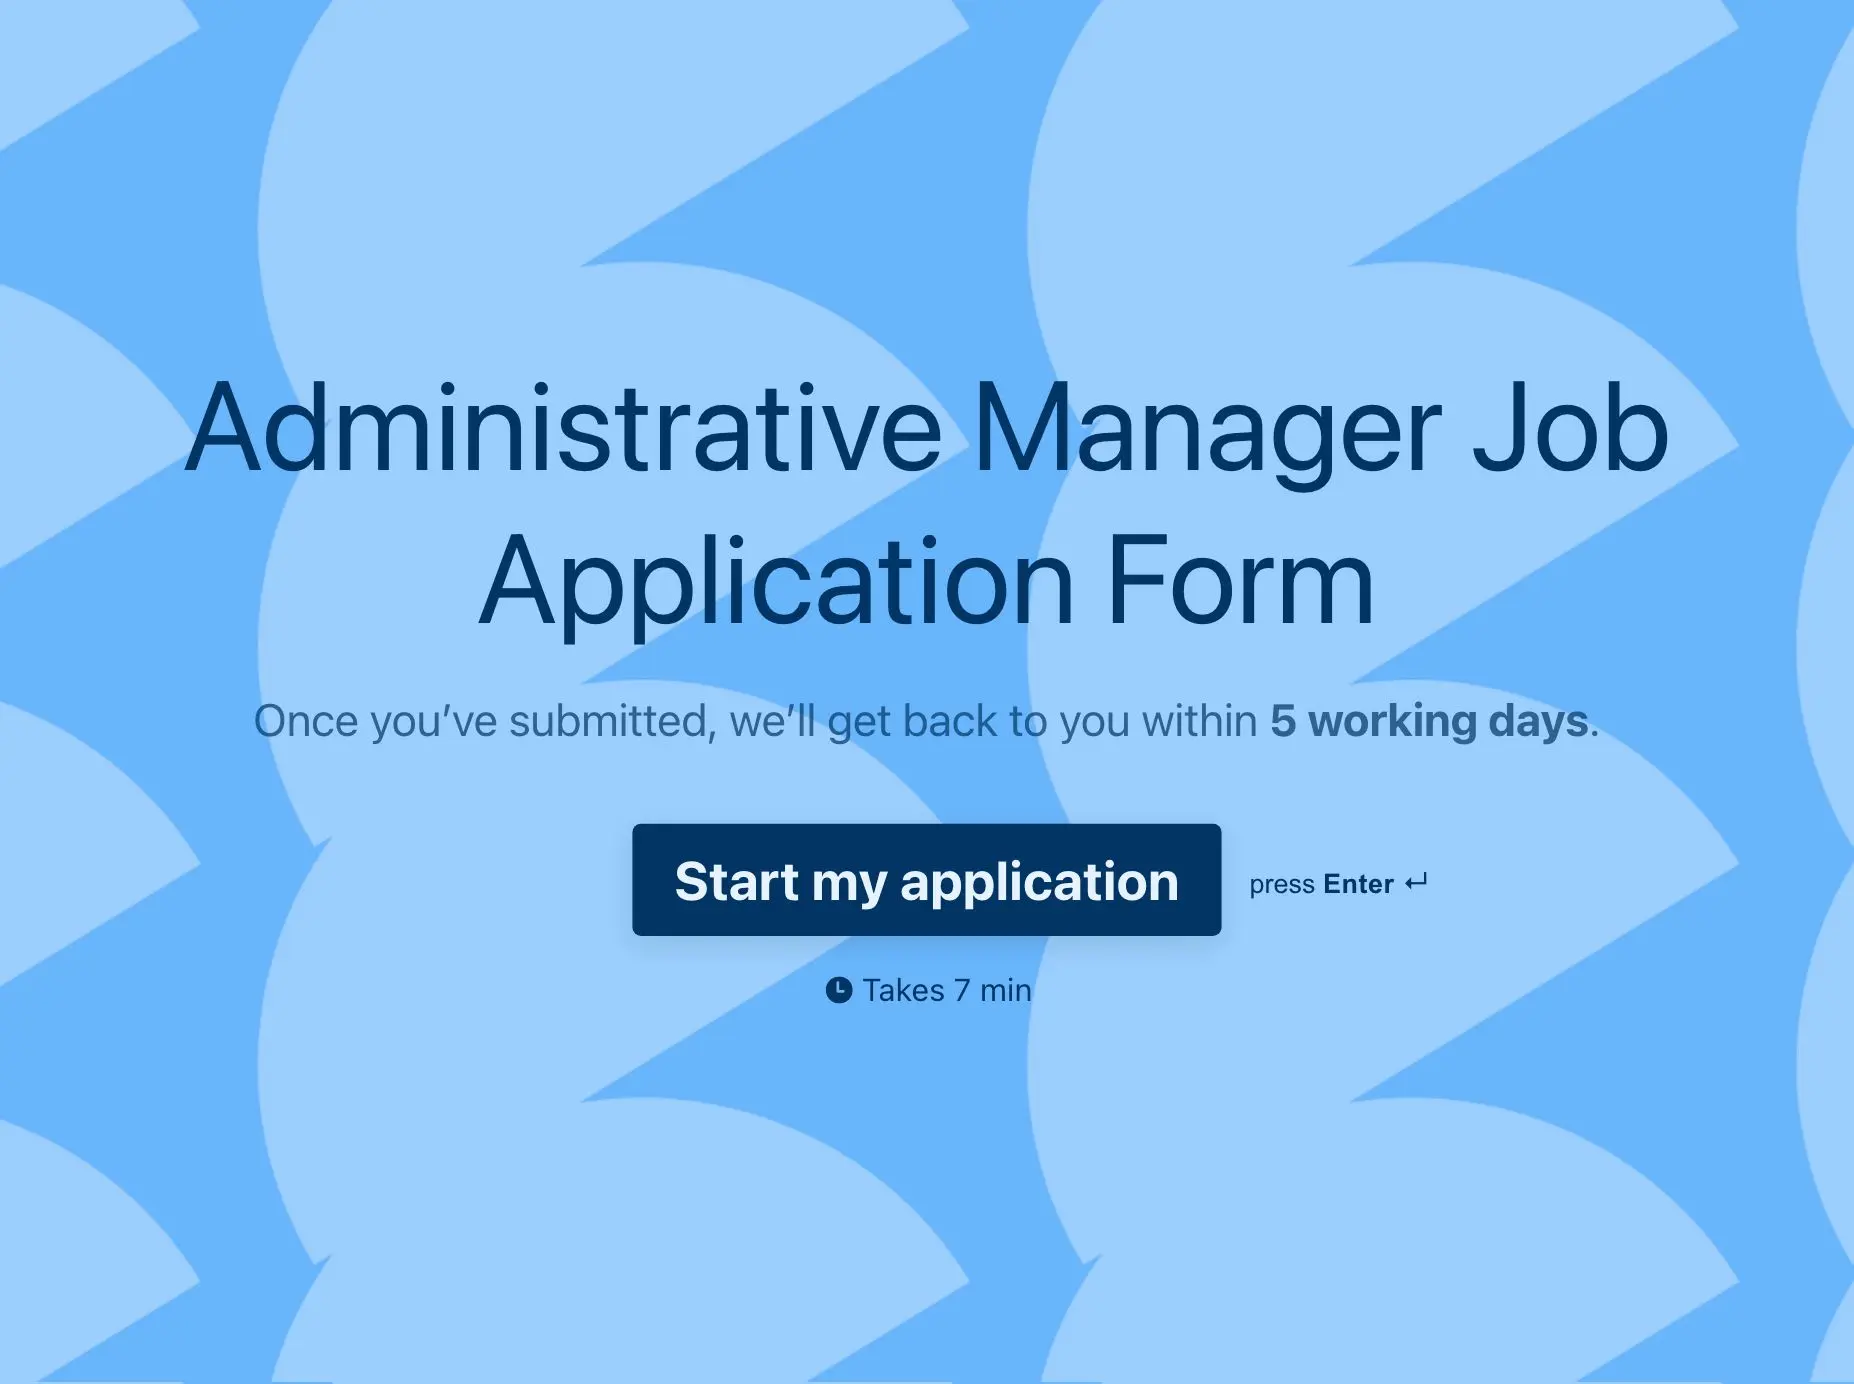 Administrative Manager Job Application Form Template Hero